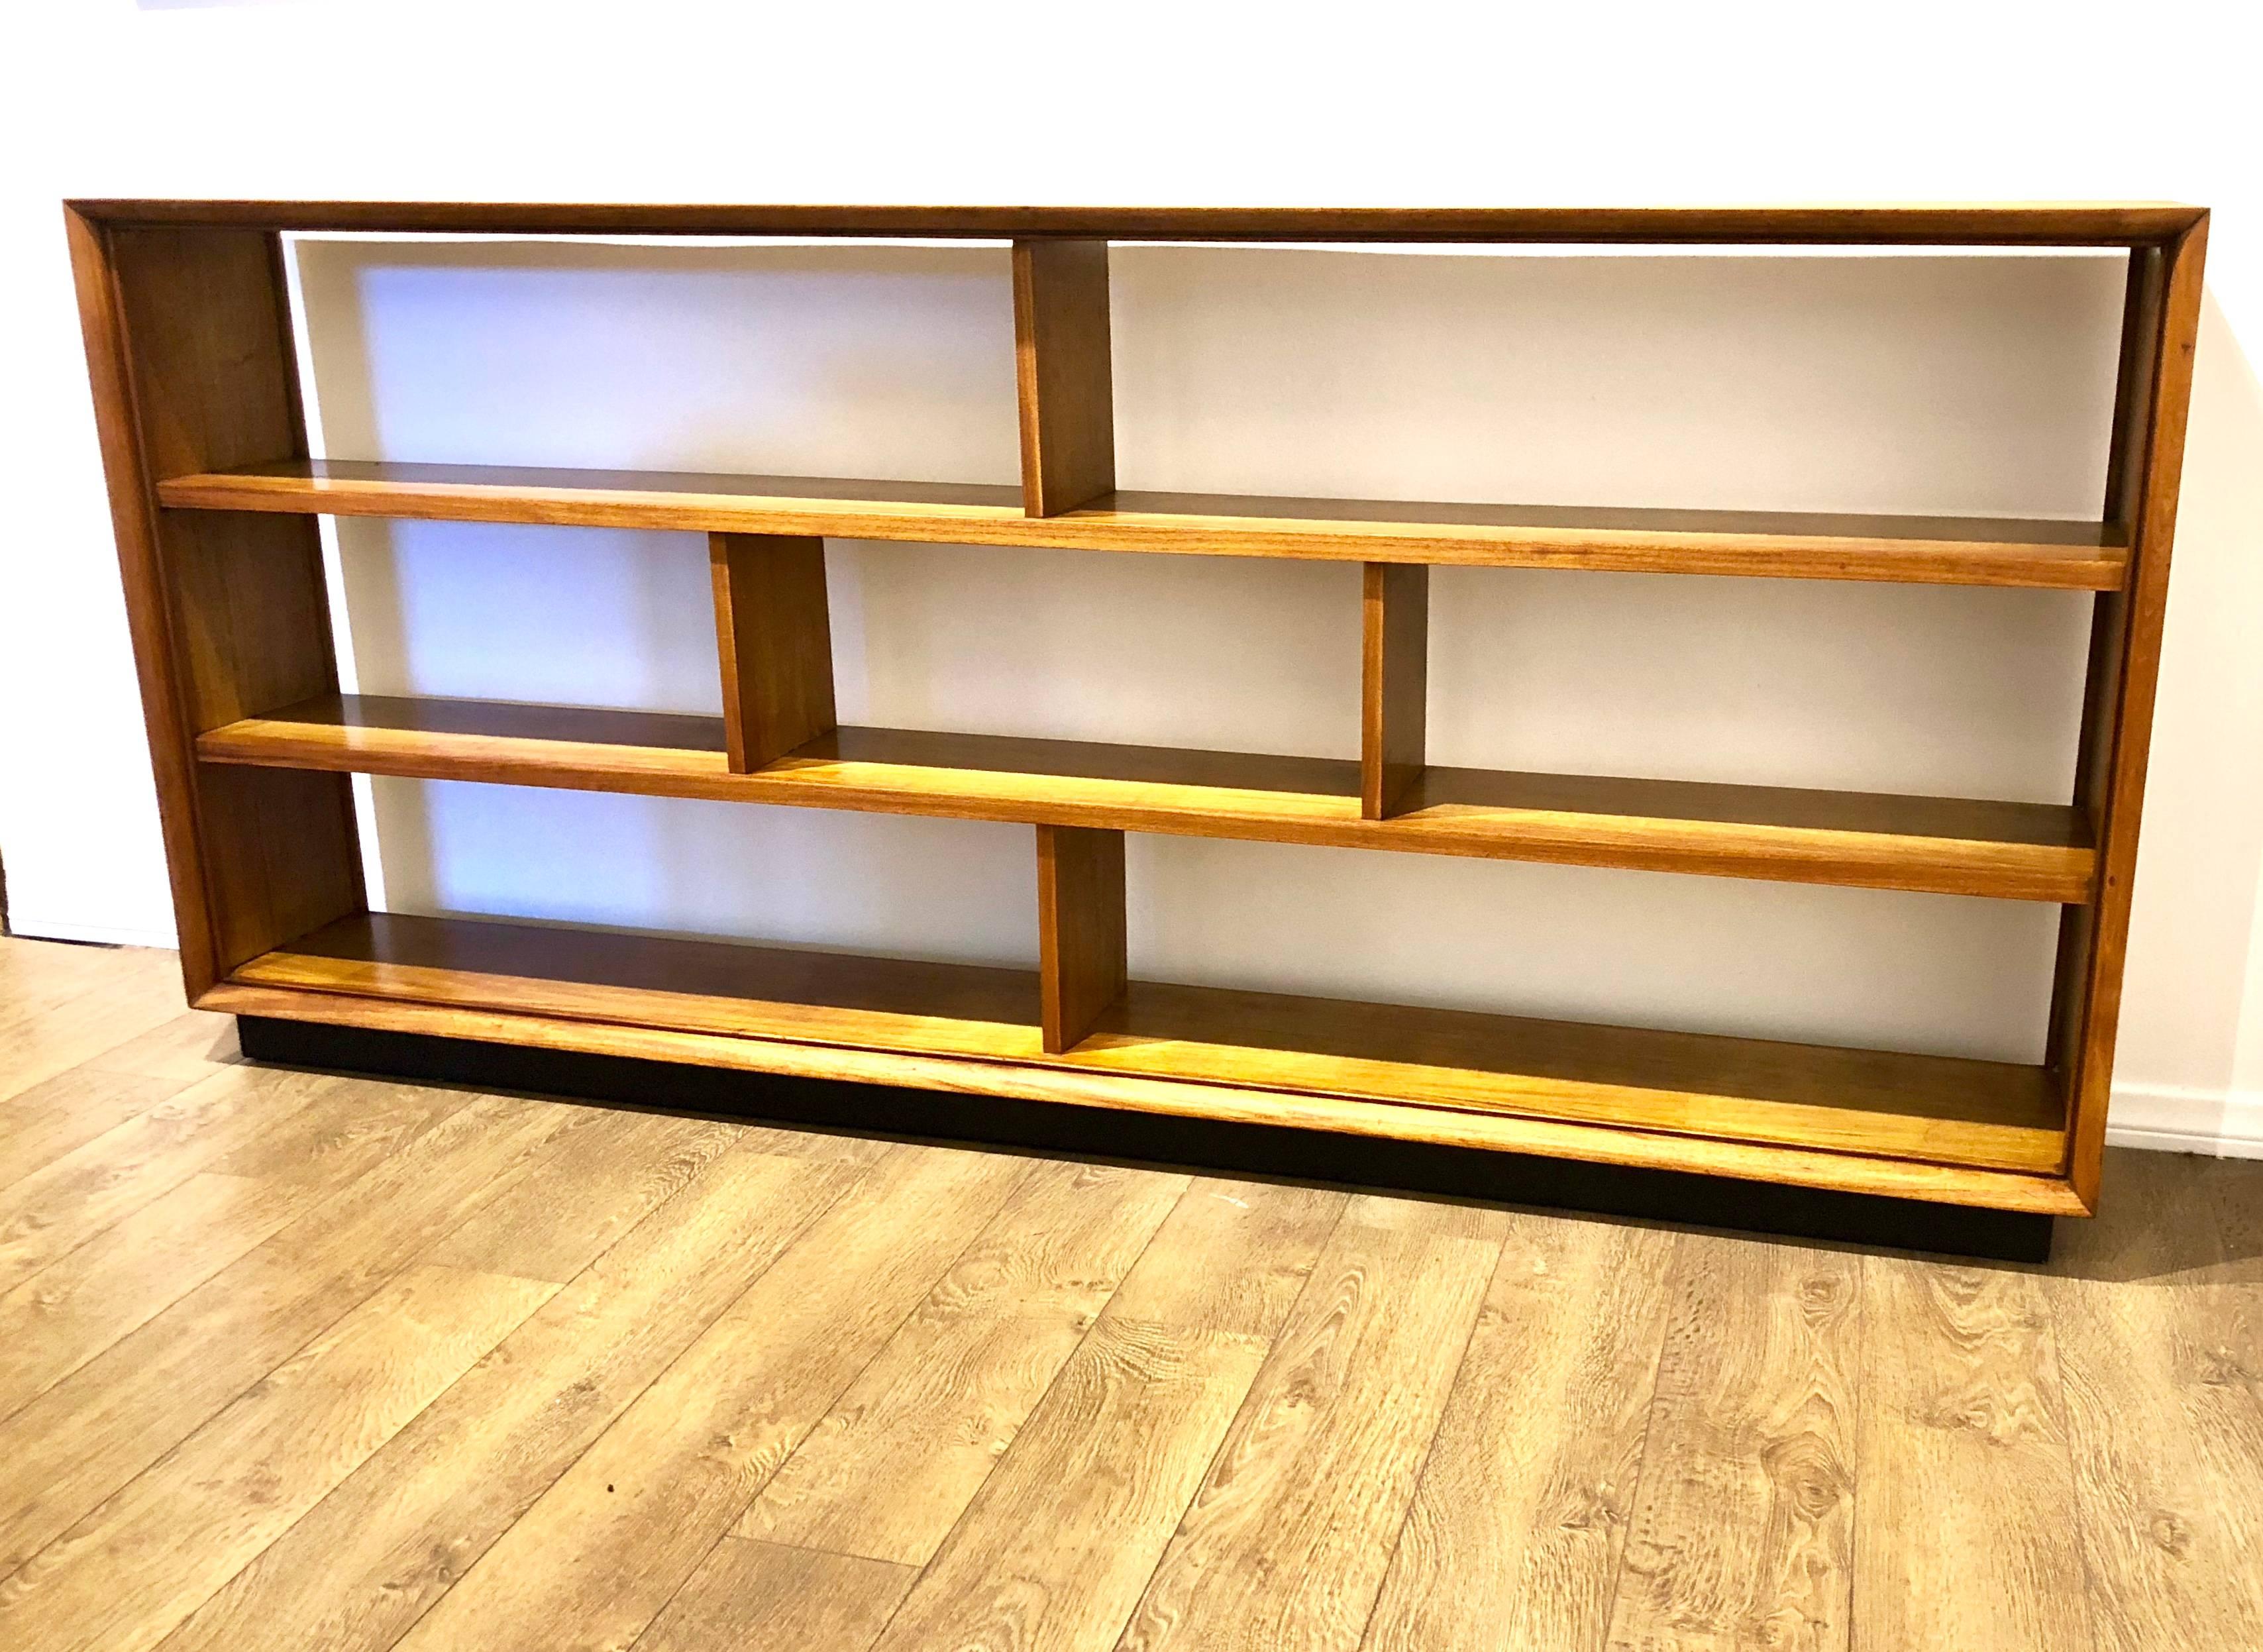 Beautiful long well made piece freshly refinished very nice and clean condition, nice beveled edge refinished in both sides, can be used as room divider, with black lacquered base. Measure: With 9.5" space in between shelves.